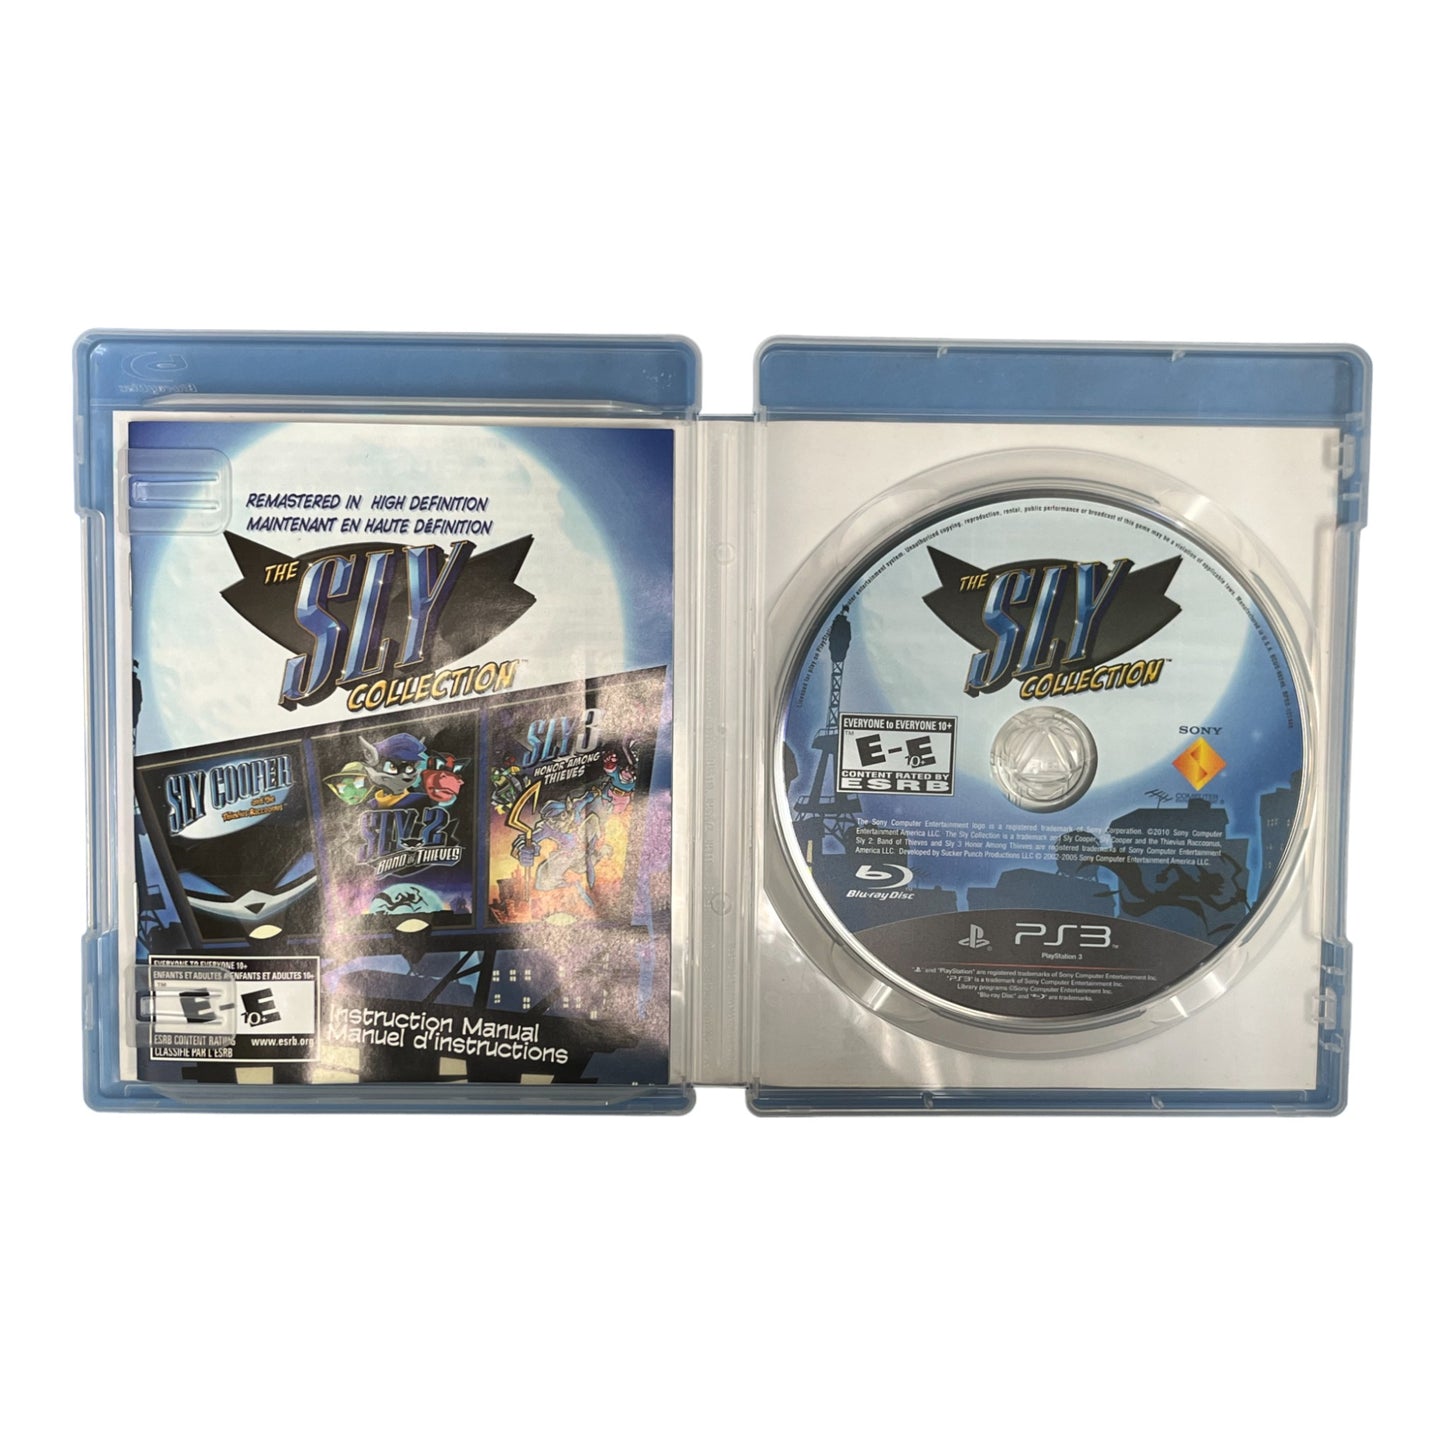 The Sly Collection (PS3)